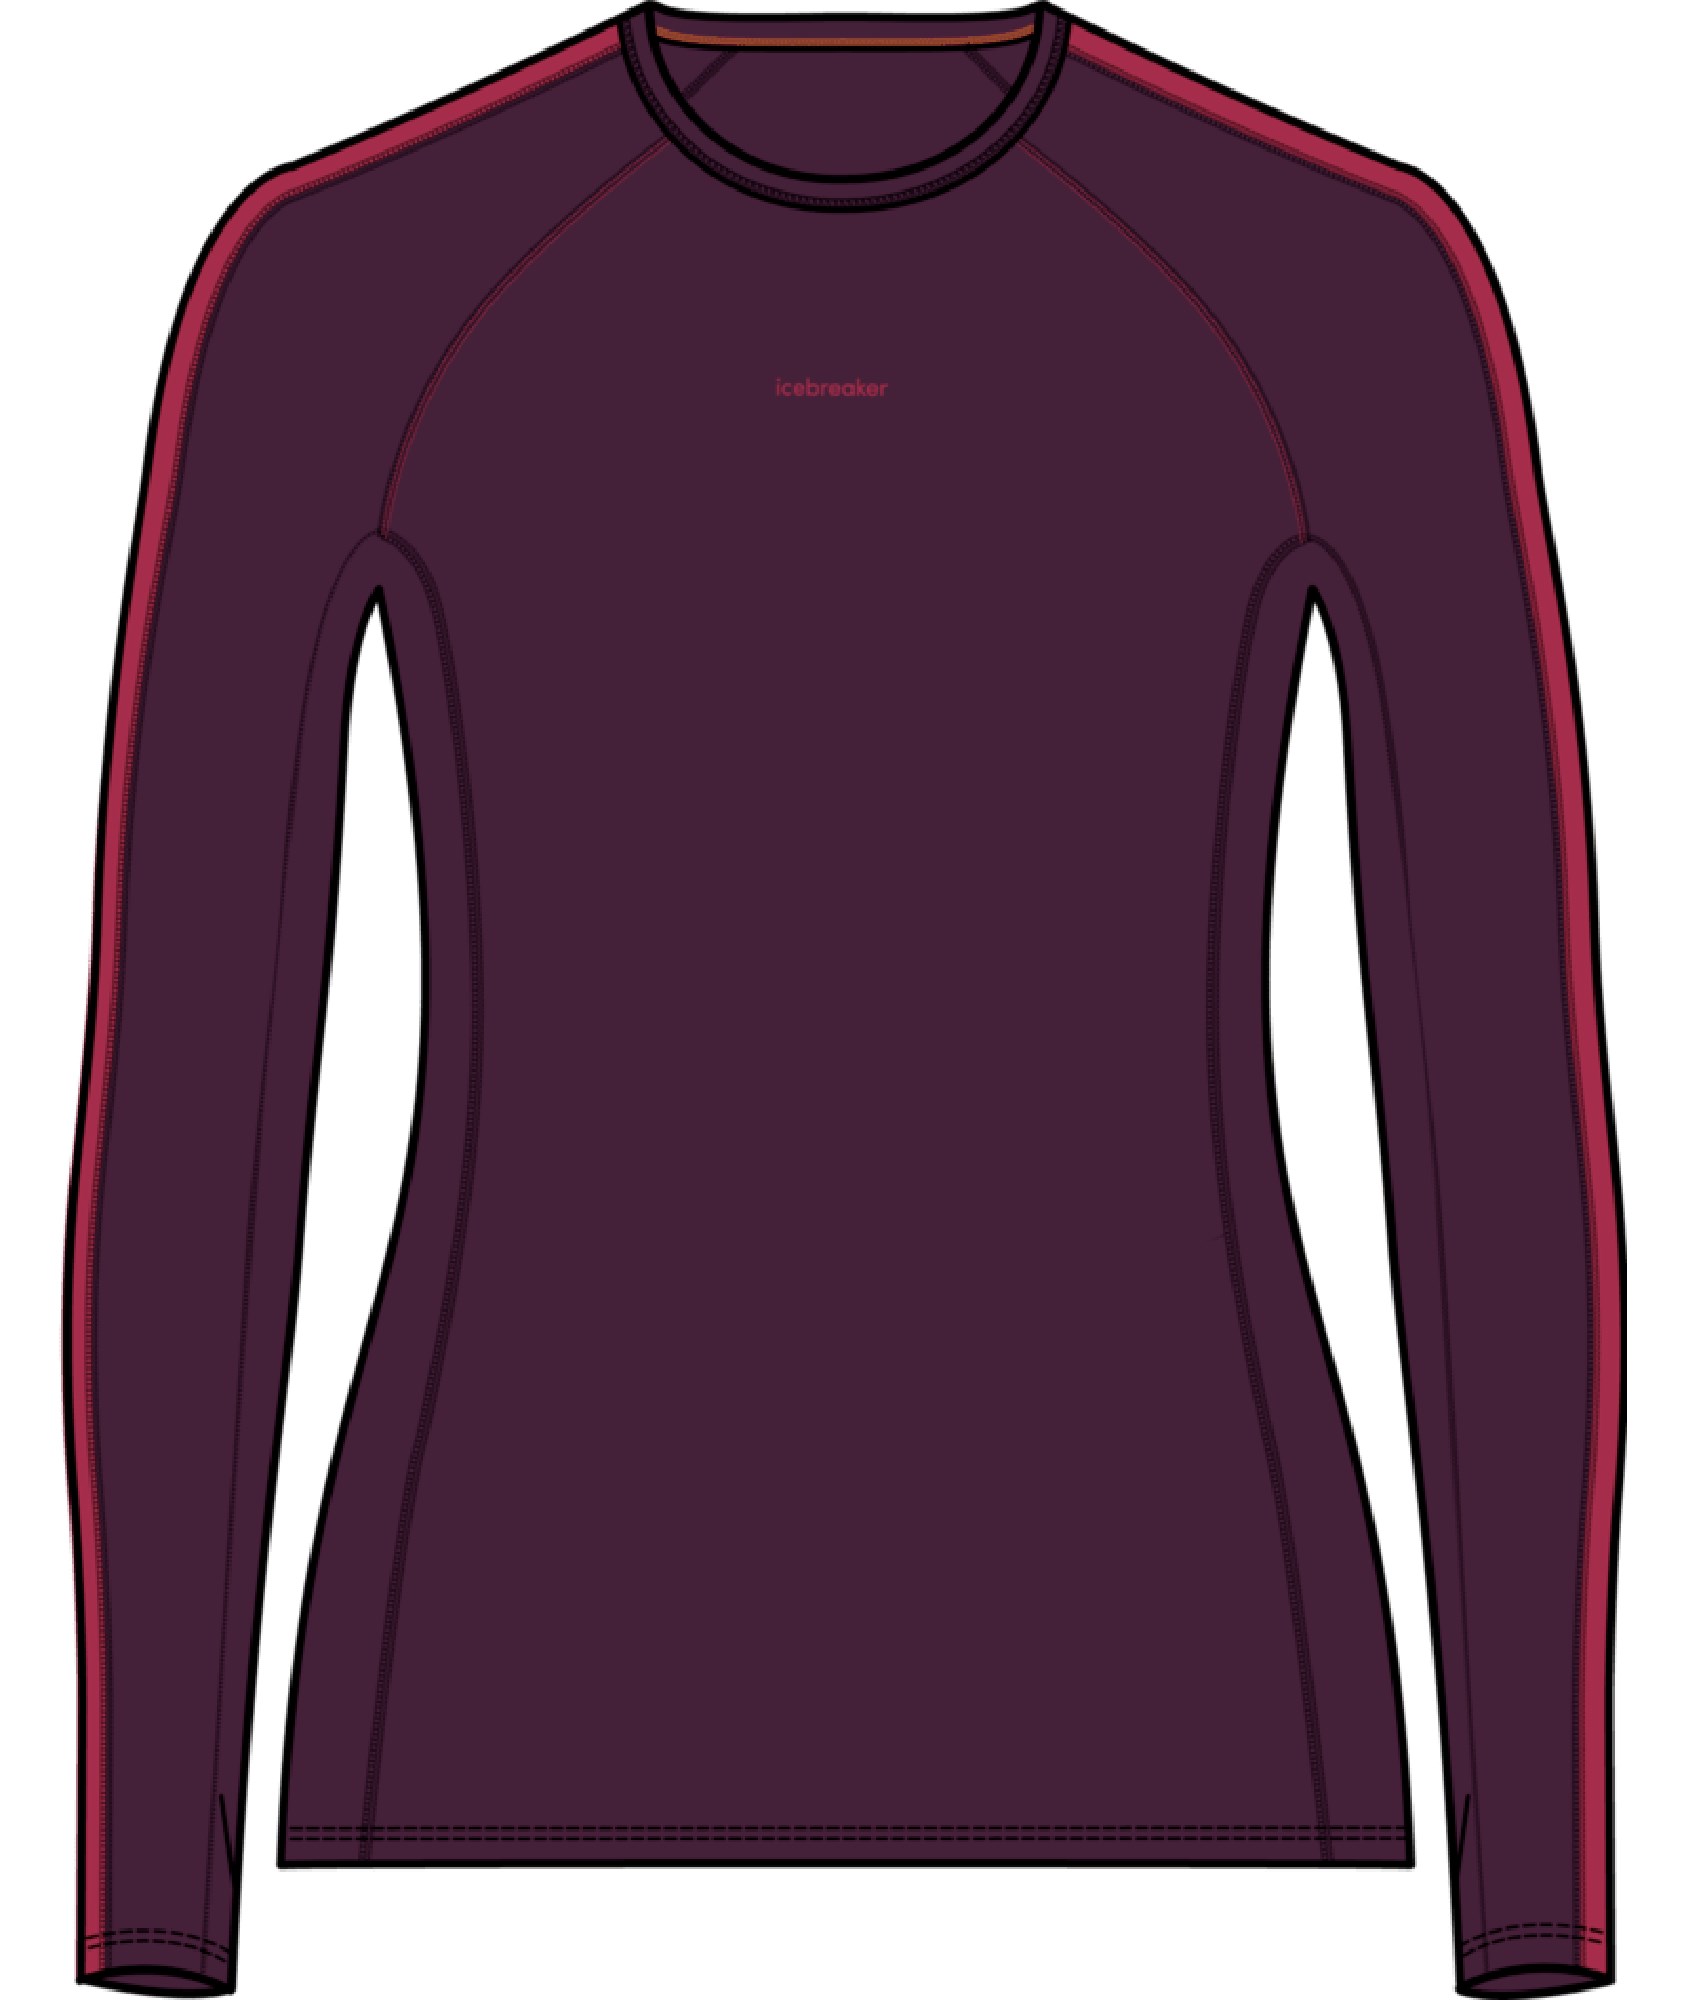 https://op2.0ps.us/original/opplanet-icebreaker-200-zoneknit-long-sleeve-crewe-thermal-top-womens-nightshade-electronpnk-cb-extra-small-ib0a56hd940xs-main